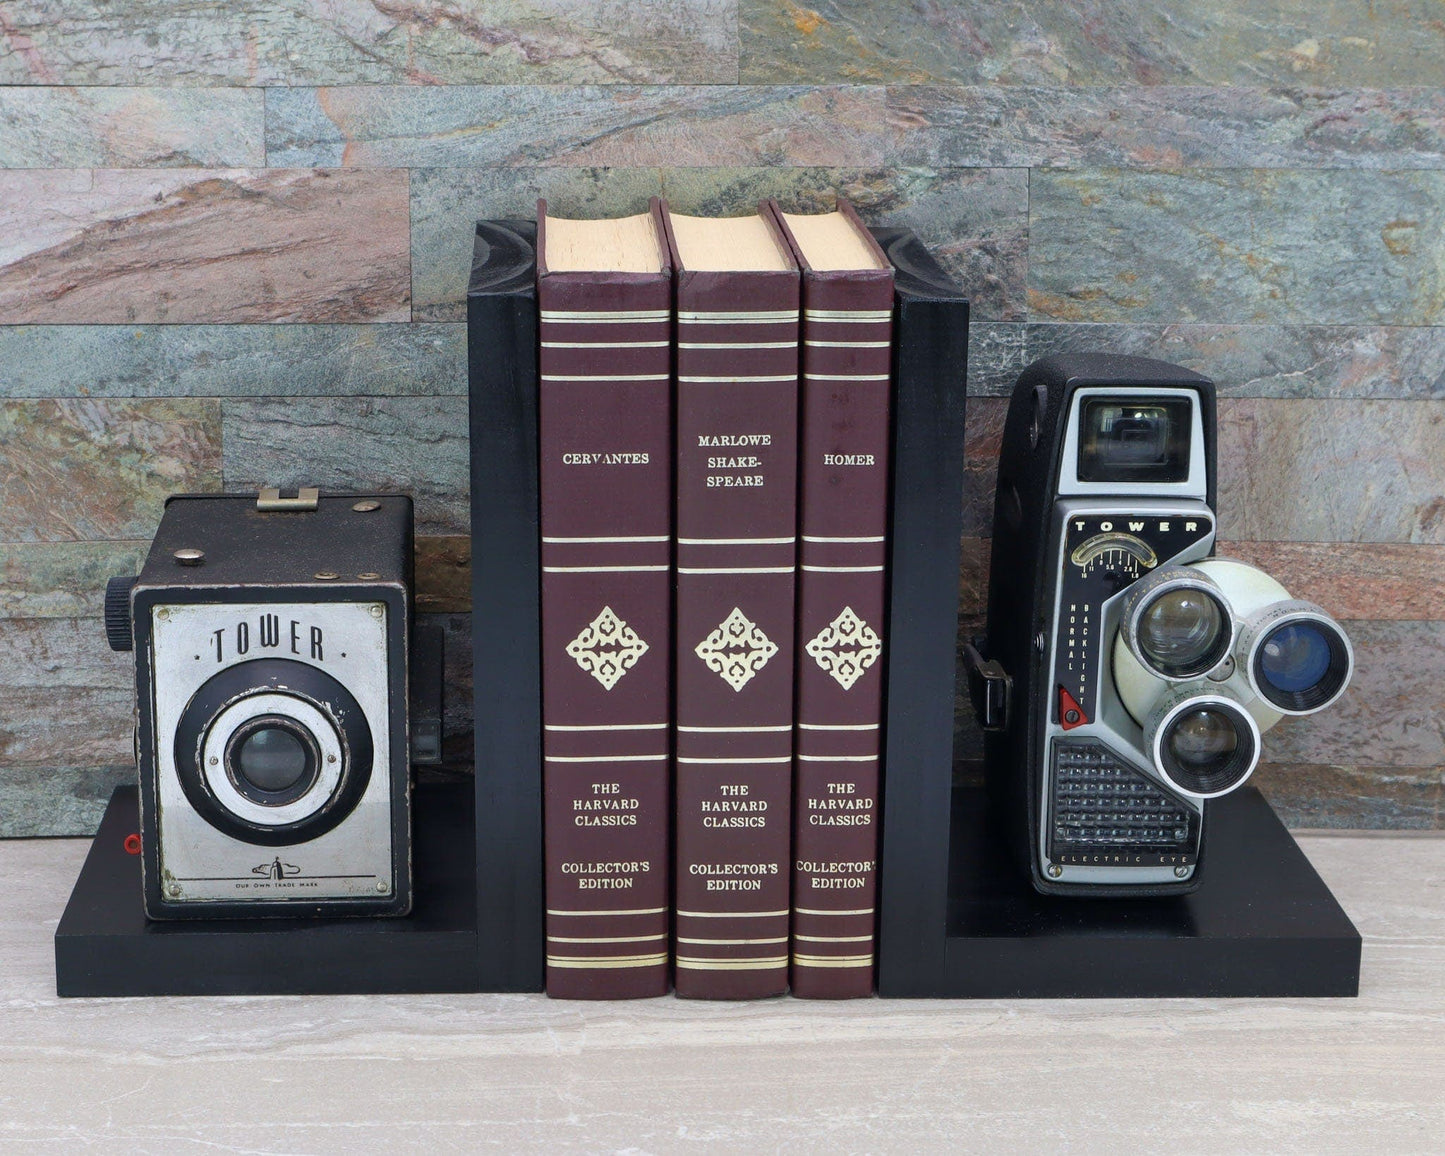 LightAndTimeArt Bookends Vintage Tower Camera Bookends - DVD Holder - Movie Theater Décor - Movie Maker gift - Actor gift - Actress gift - Movie Room decor